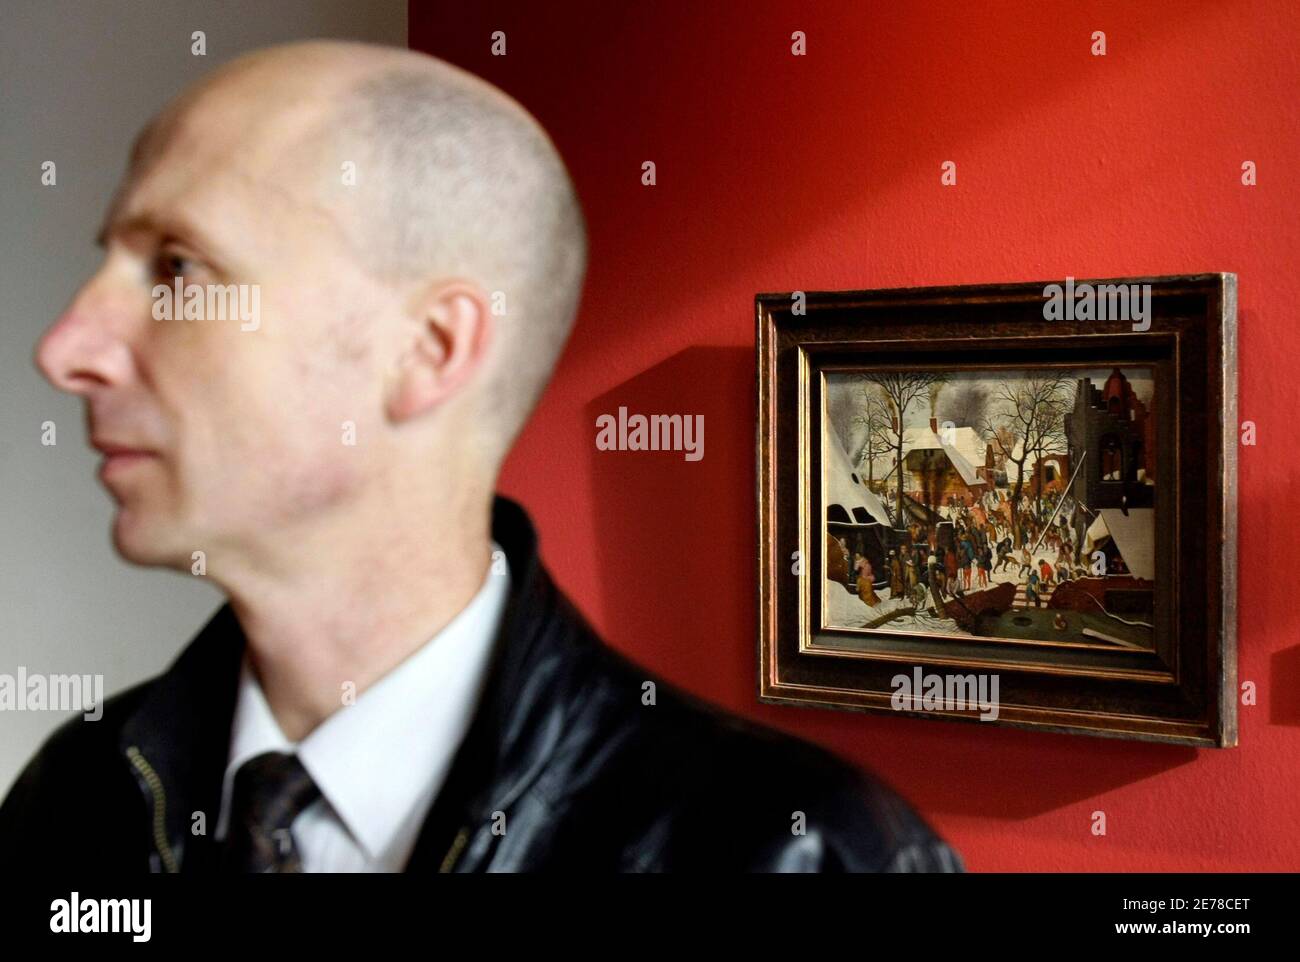 A man attends a Moscow exhibition of top lots to be auctioned by the Christie's fine art auction house, October 14, 2008. Lovers of expensive art still have cash to burn and will turn their multi-million dollar art pieces into investments as the financial crisis bites into savings and earnings, global auction houses said on Tuesday. The picture on display is Pieter Brueghel the Younger's 'Adoration of the Magi'. REUTERS/Denis Sinyakov  (RUSSIA) Stock Photo